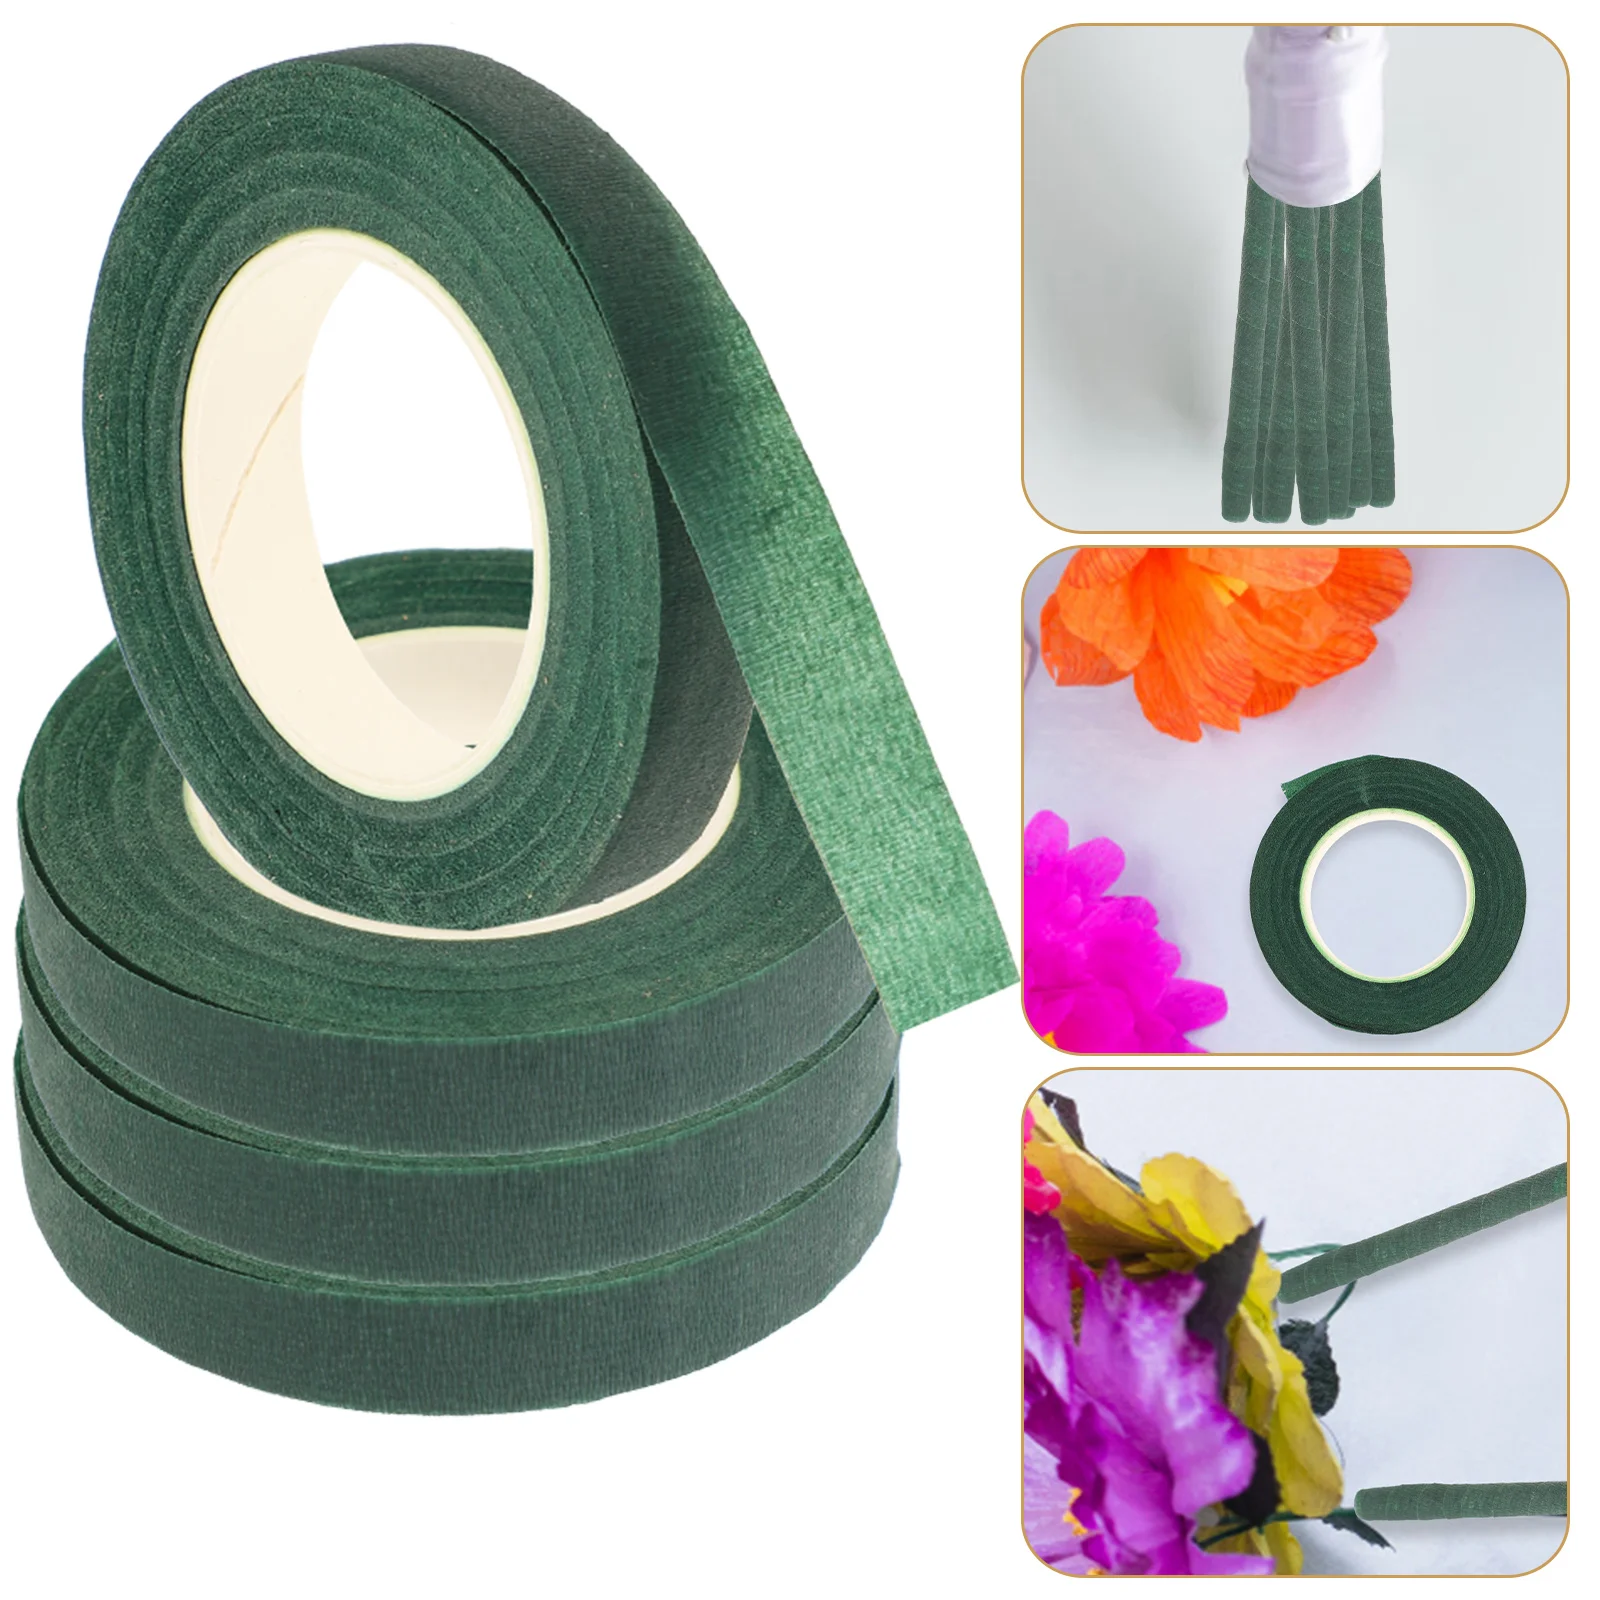 

Tape Floral Flower Stem Green Tapes Arrangement Gift Bouquet Florist Washi Wrapping Diy Wrap Supplies Craft Masking Paper